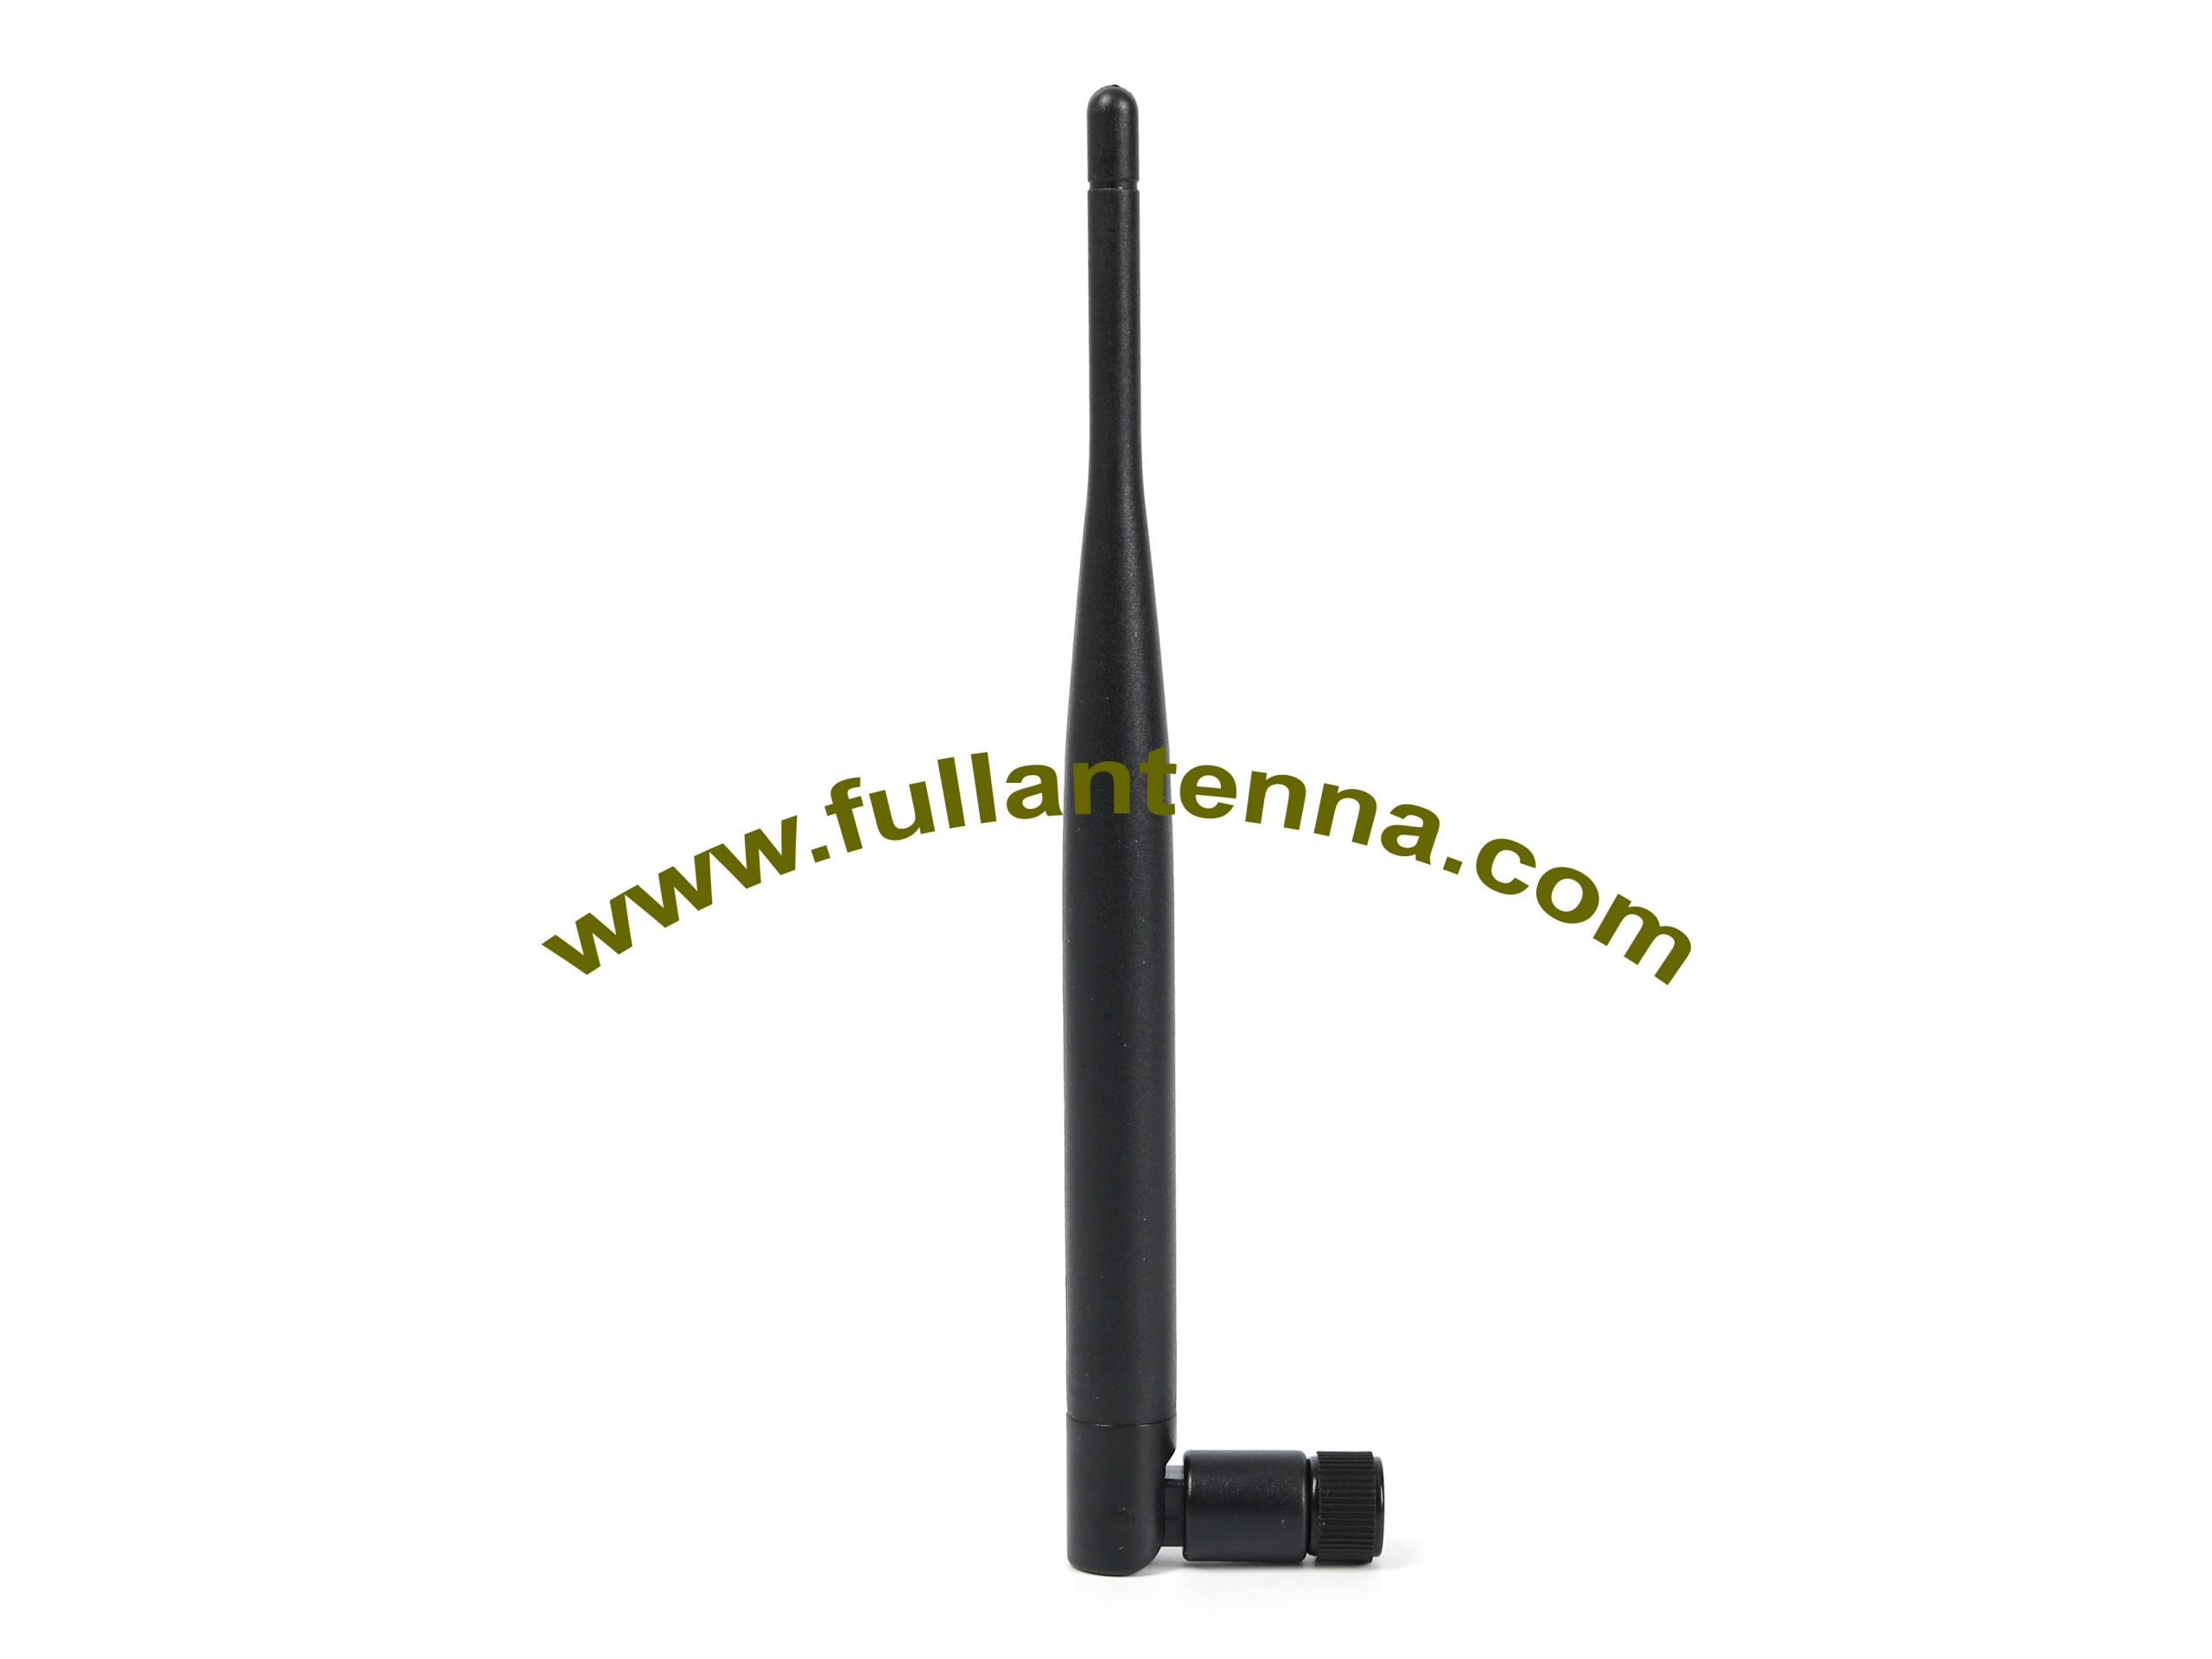 P/N:FA3G.0304,3G Rubber Antenna,3G rubber whip antenna  with SMA or FME connector